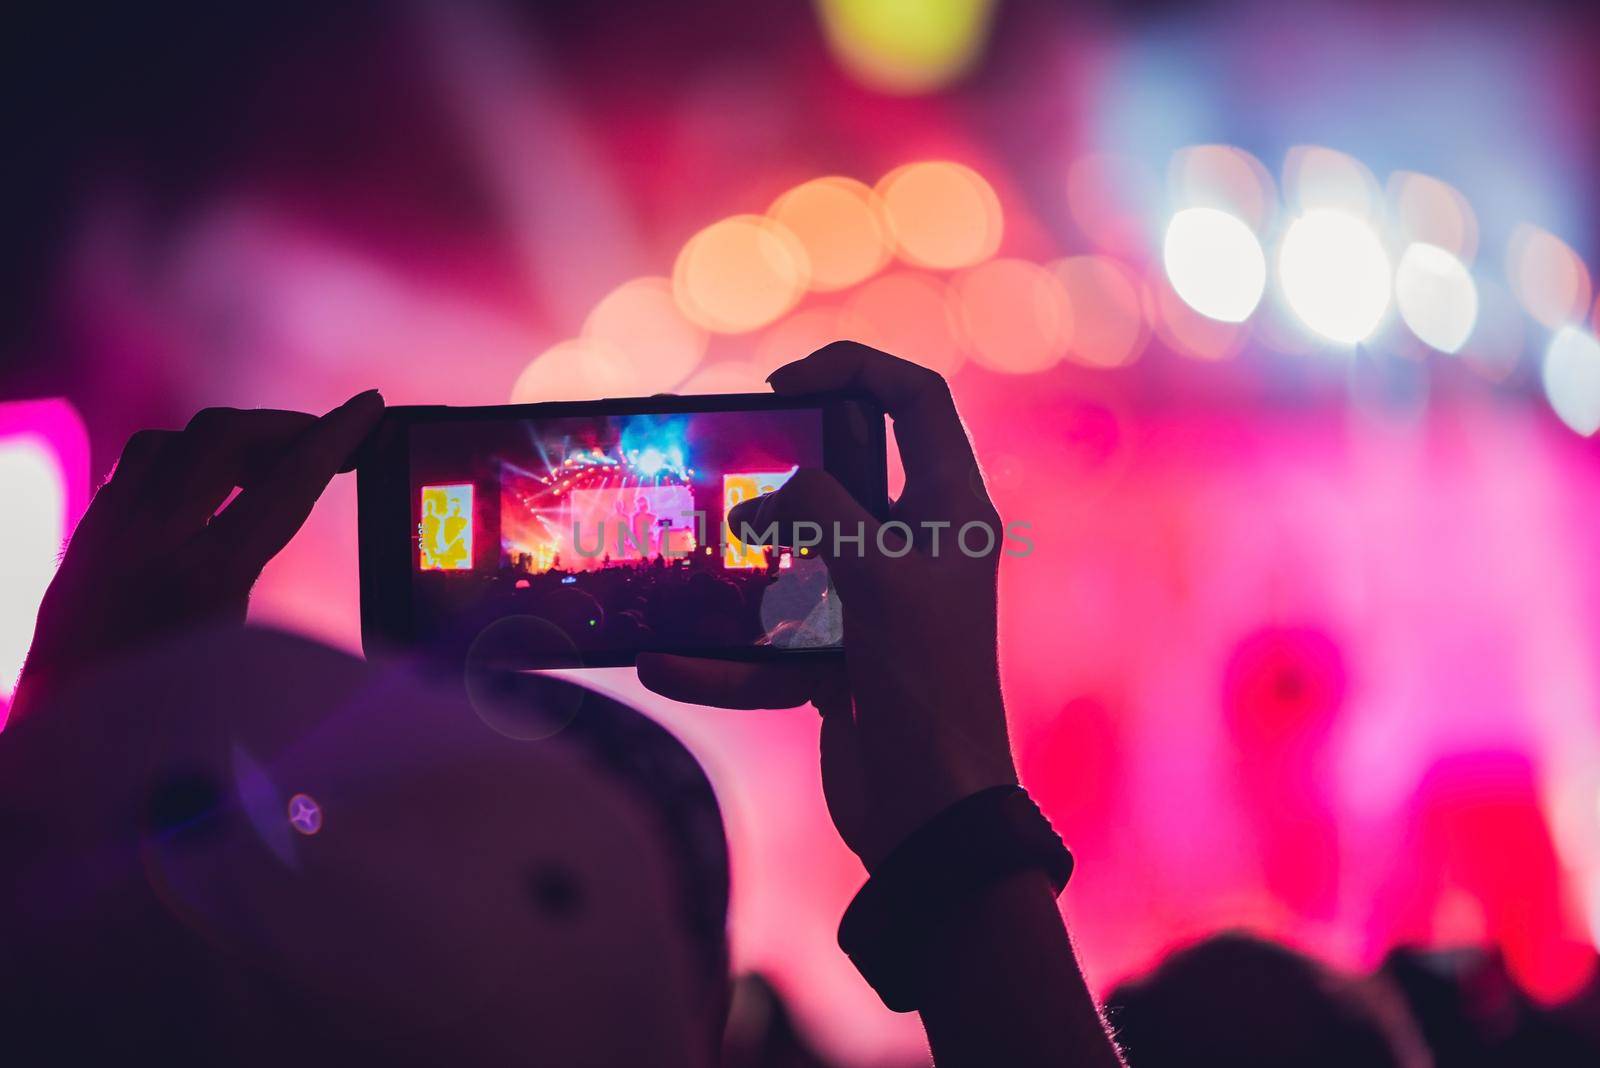 People enjoying rock concert and taking photos with cell phone at music festival.